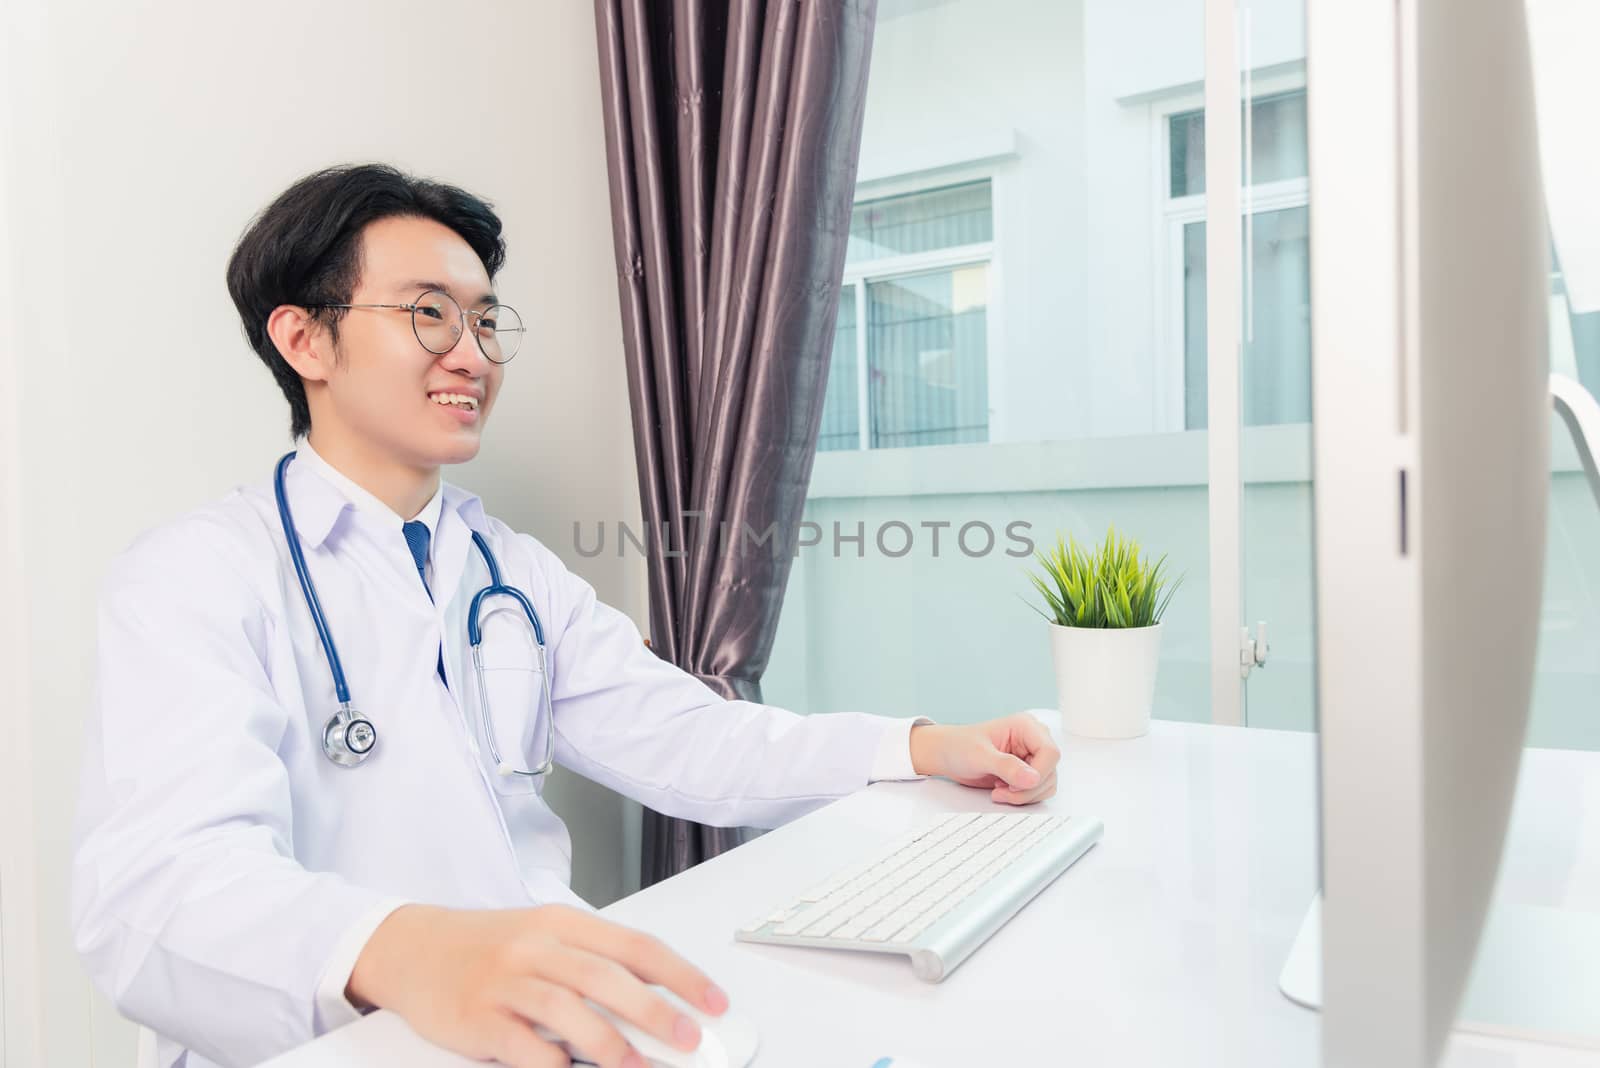 Asian young handsome doctor man wearing a doctor's dress and stethoscope video conference call or facetime with computer to patient he smiling sitting on desk at hospital office, Health medical care